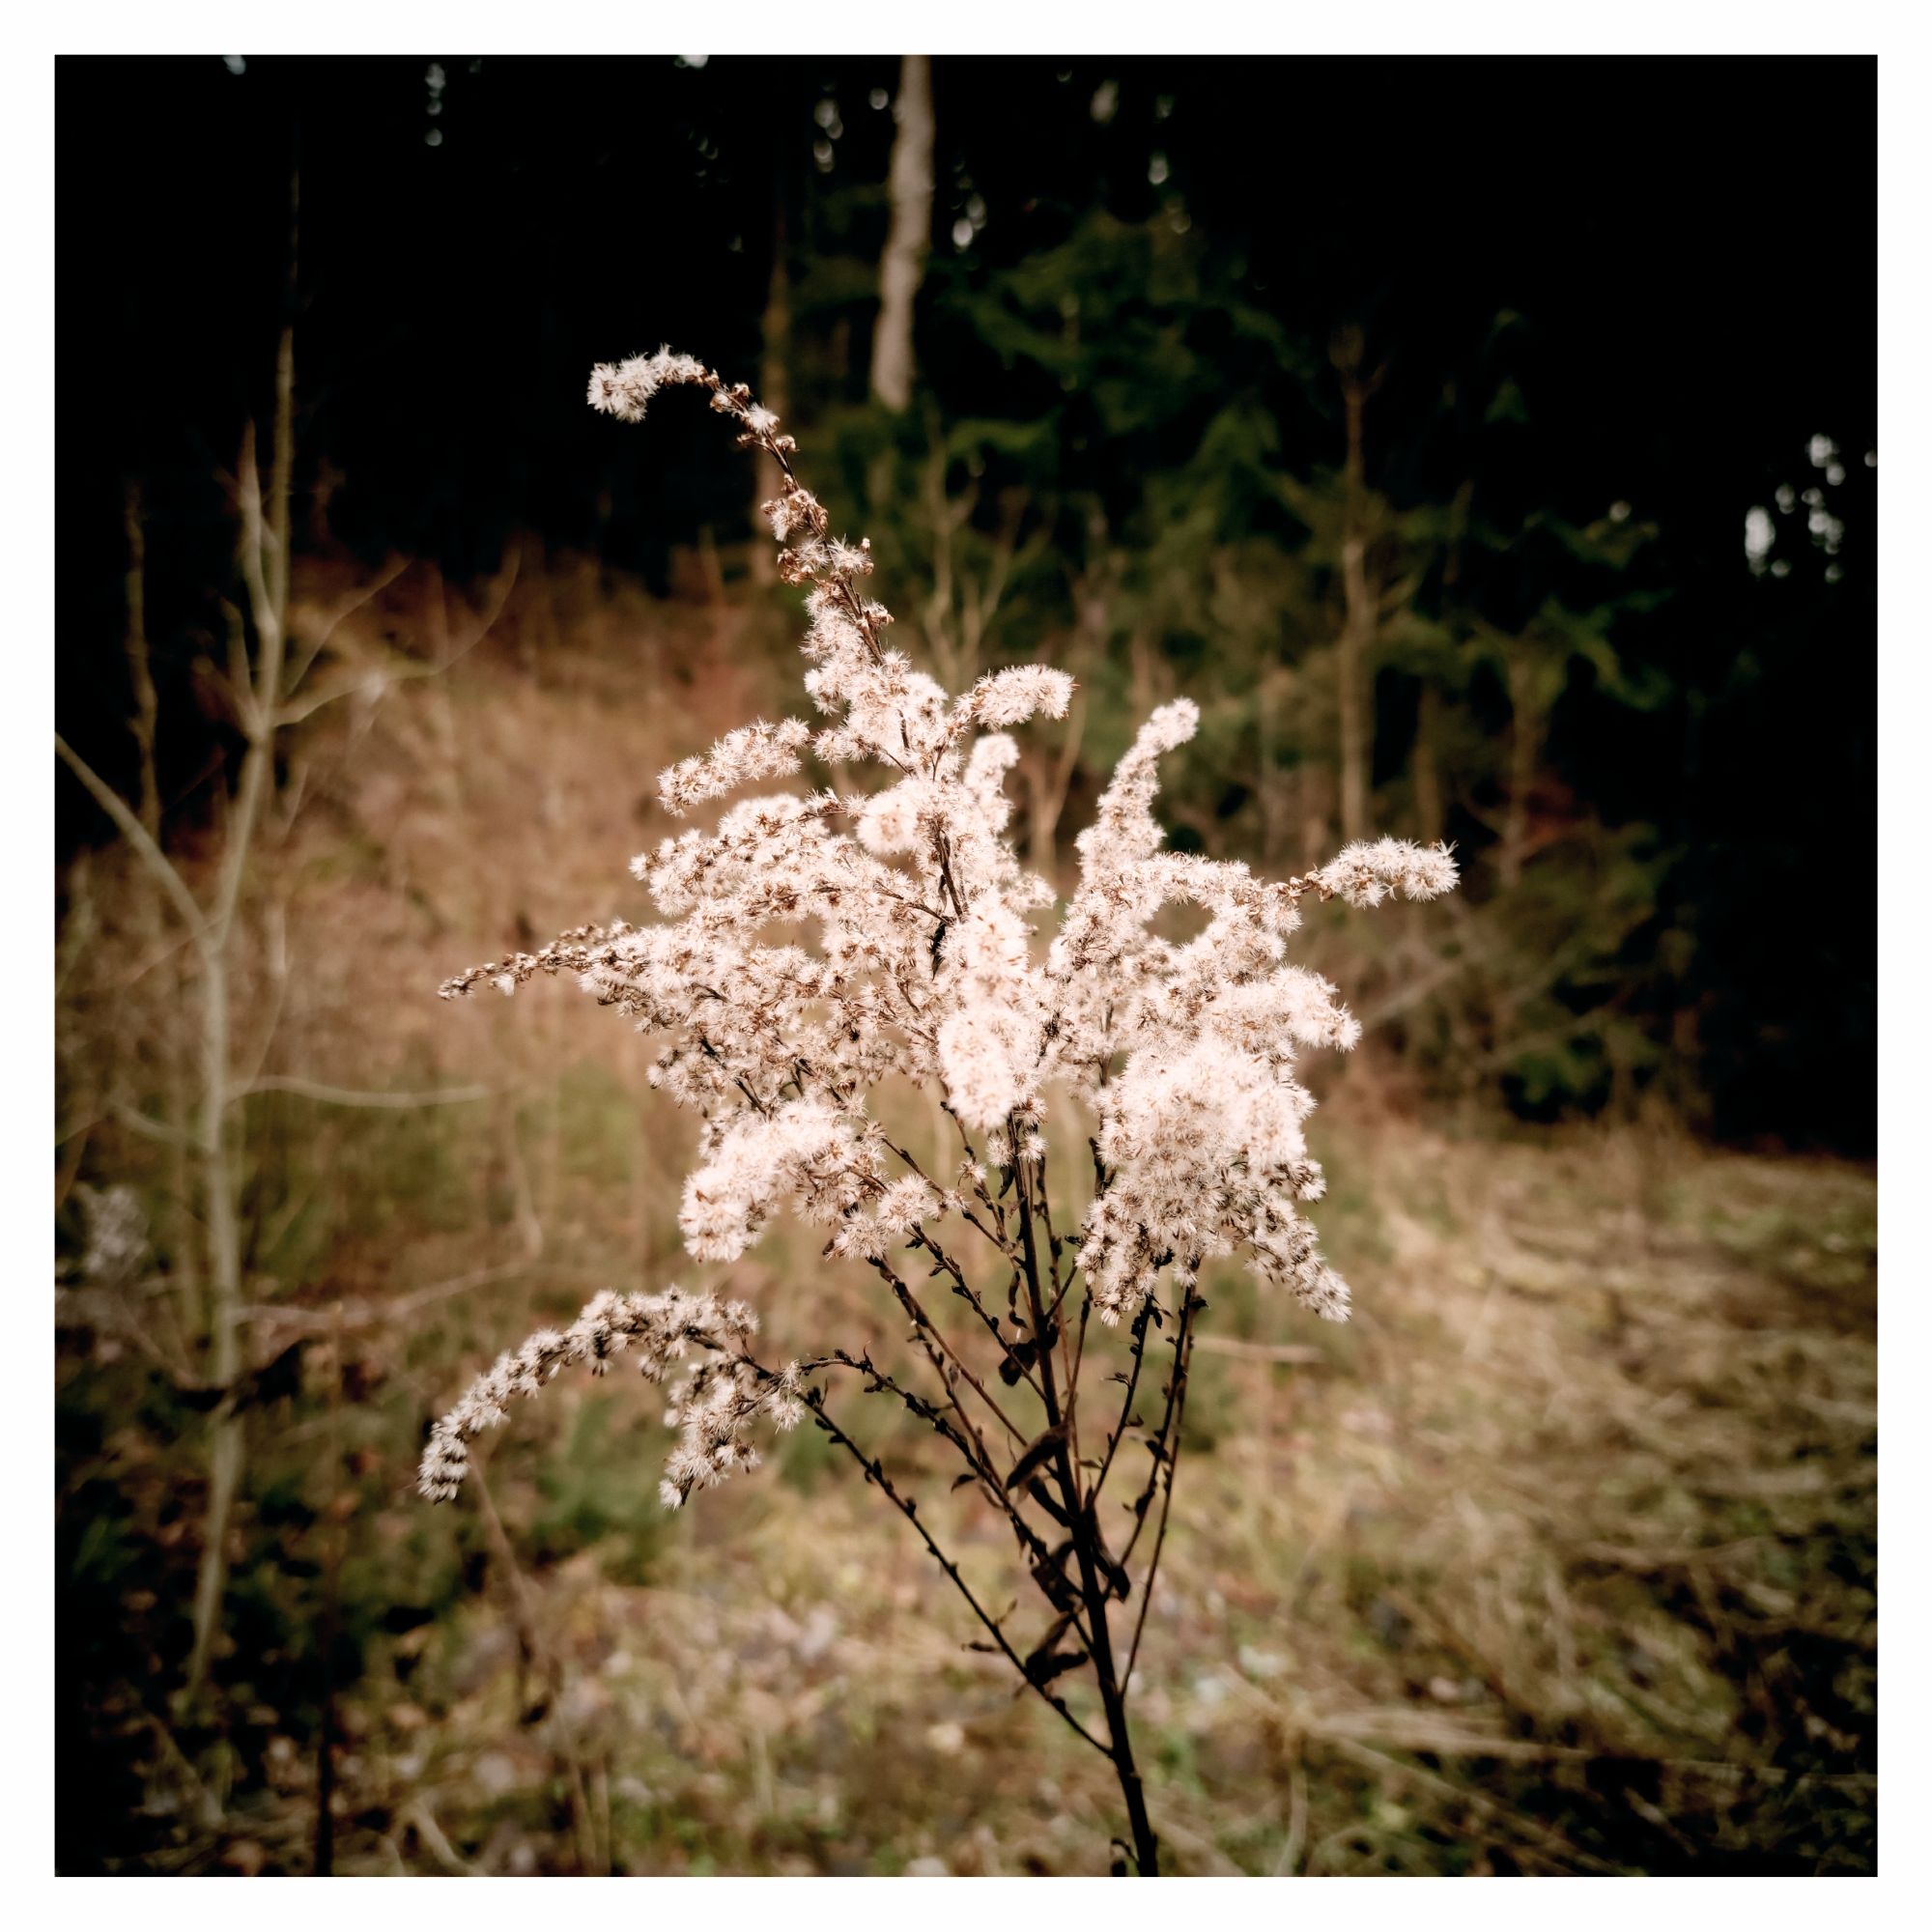 A dried blossom of some late Autumn flower.